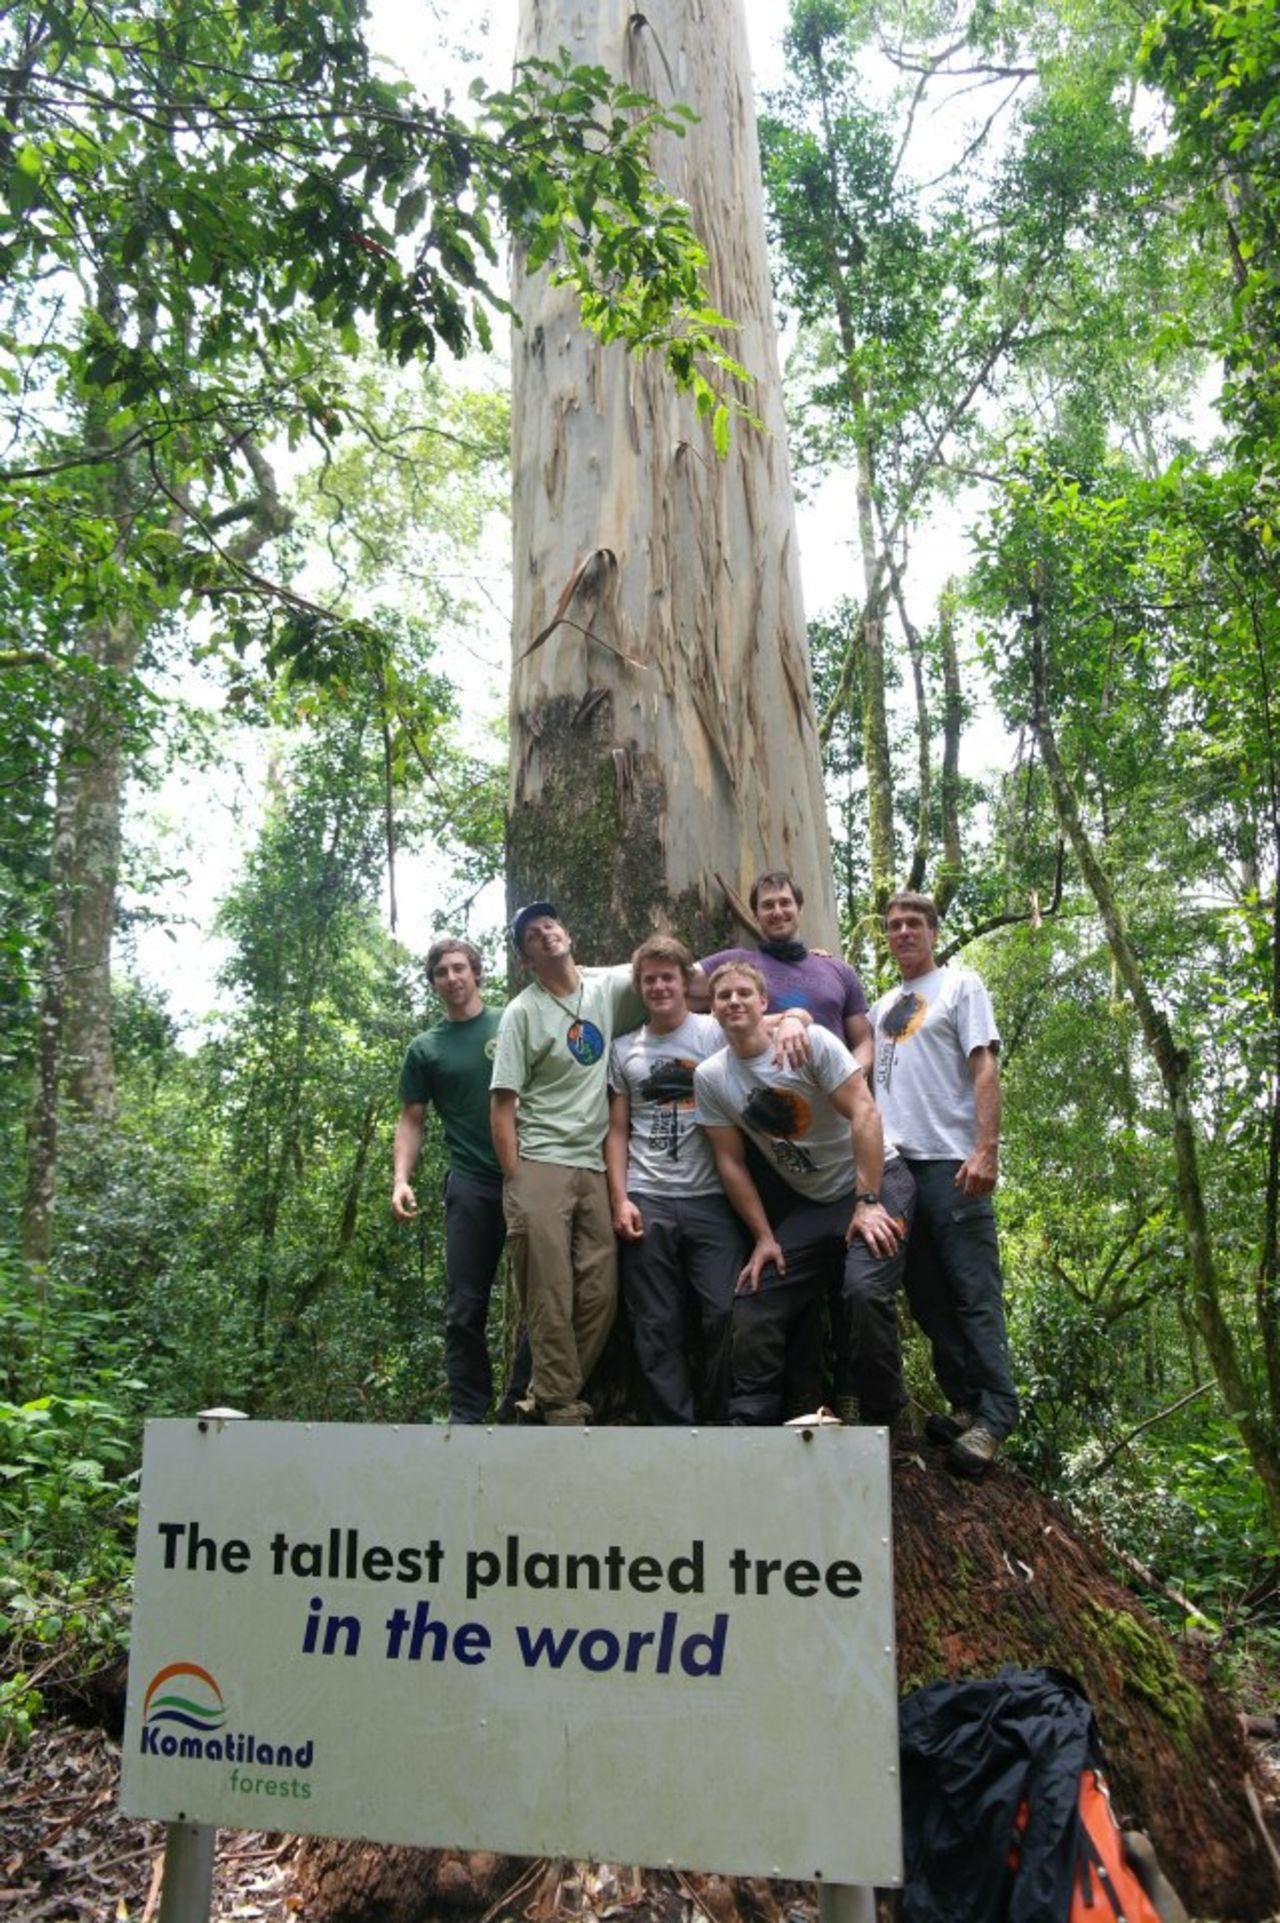 The group scaled climbed what was measured to be the world's tallest planted tree: an 81.5-meter eucalyptus in Limpopo.